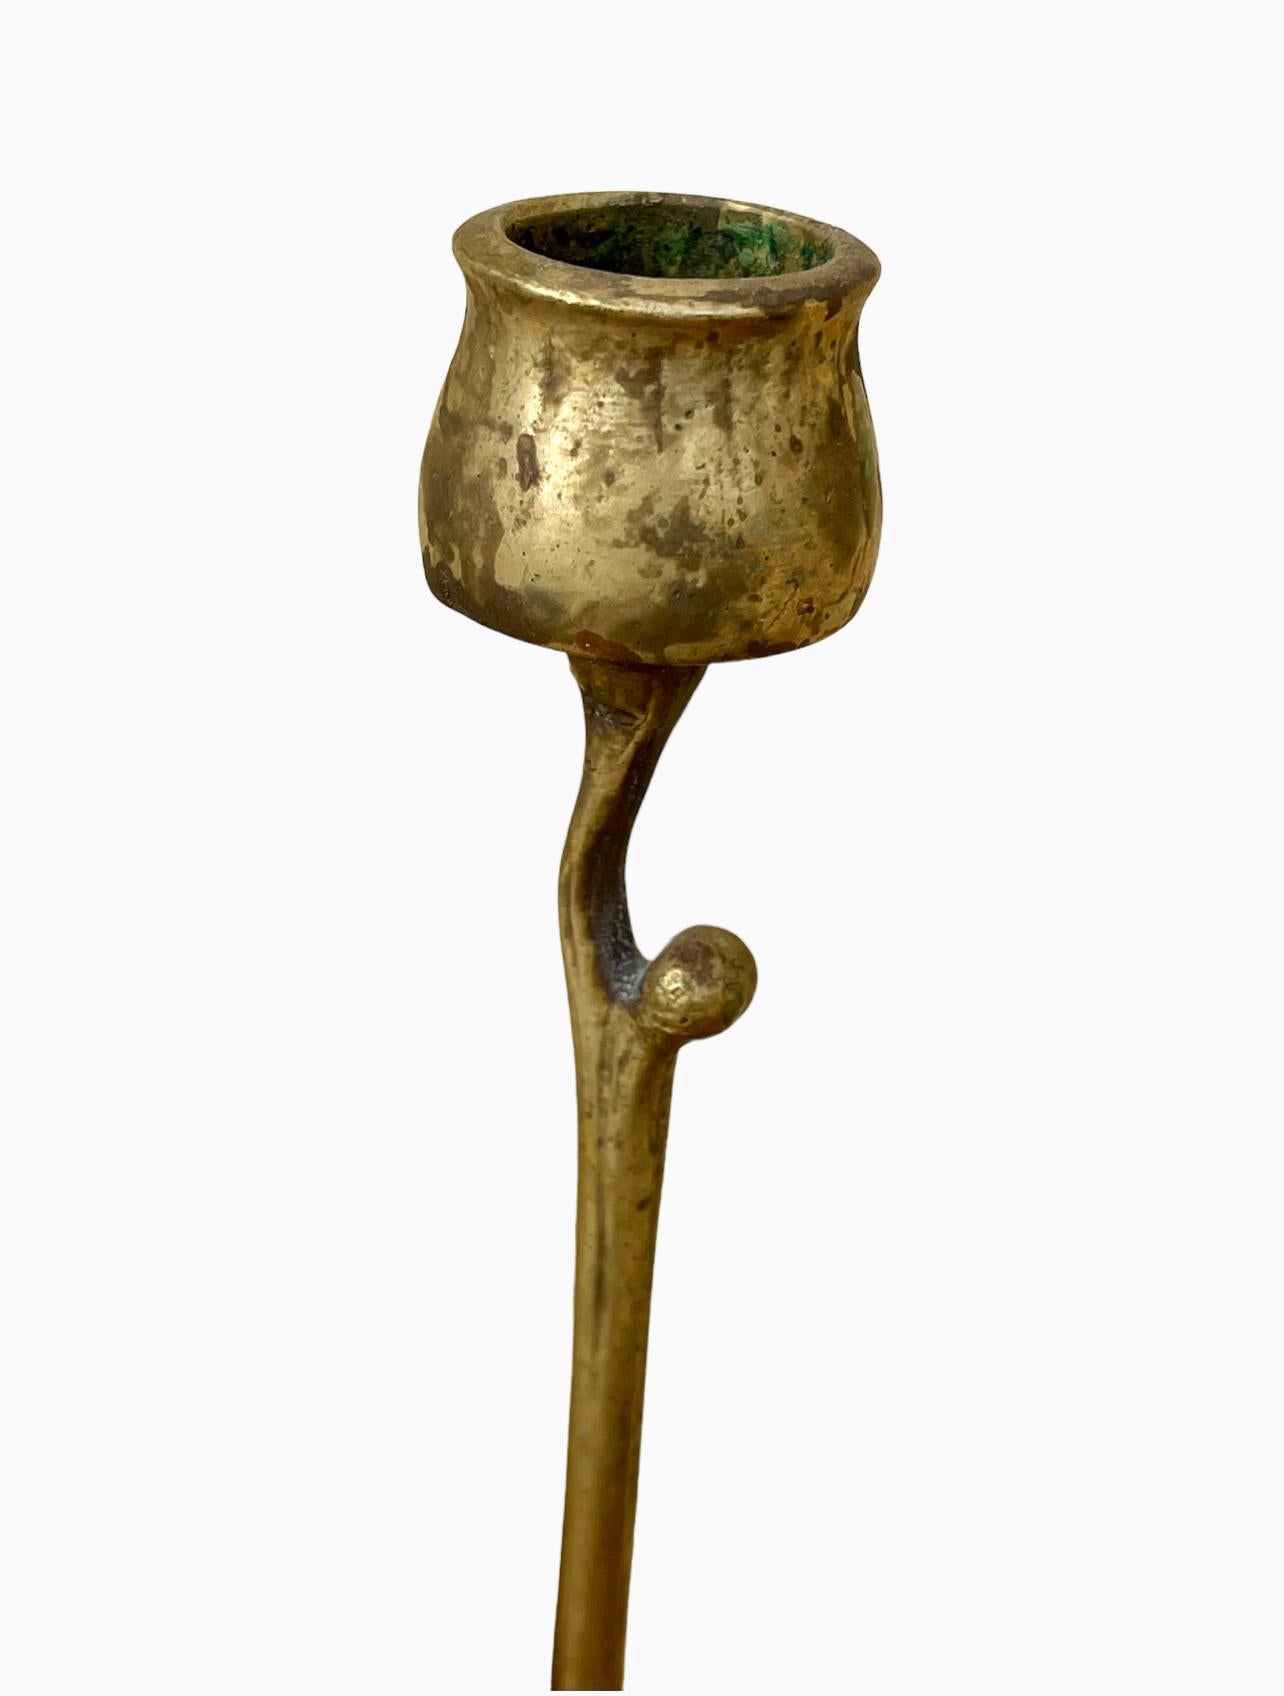 Gilded bronze candlestick forming a flower stem ending in a bud. This candlestick model is among Riemerschmid's first creations in the field of Decorative Arts, but also among the first most representative manifestations of Judendstil, Munich Art